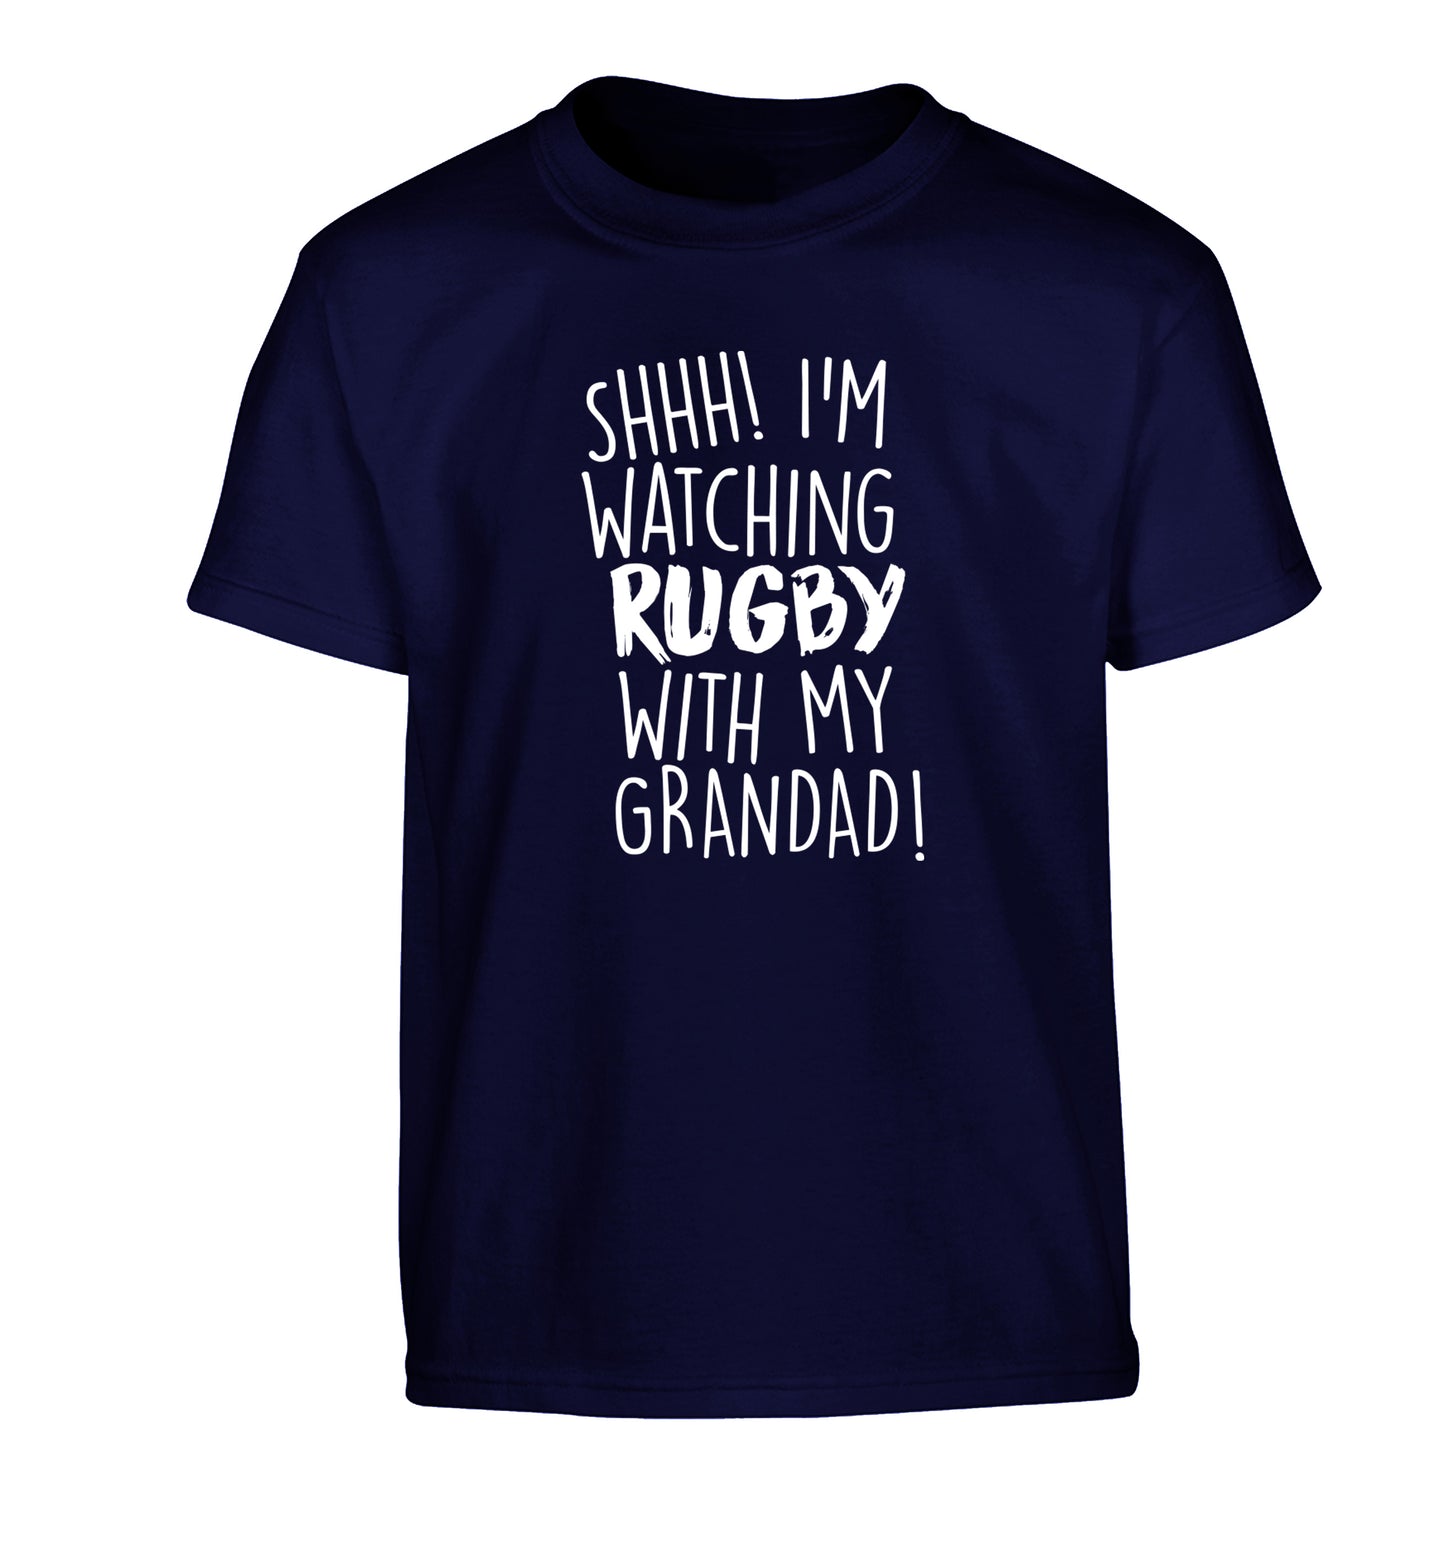 Shh I'm watching rugby with my grandad Children's navy Tshirt 12-13 Years